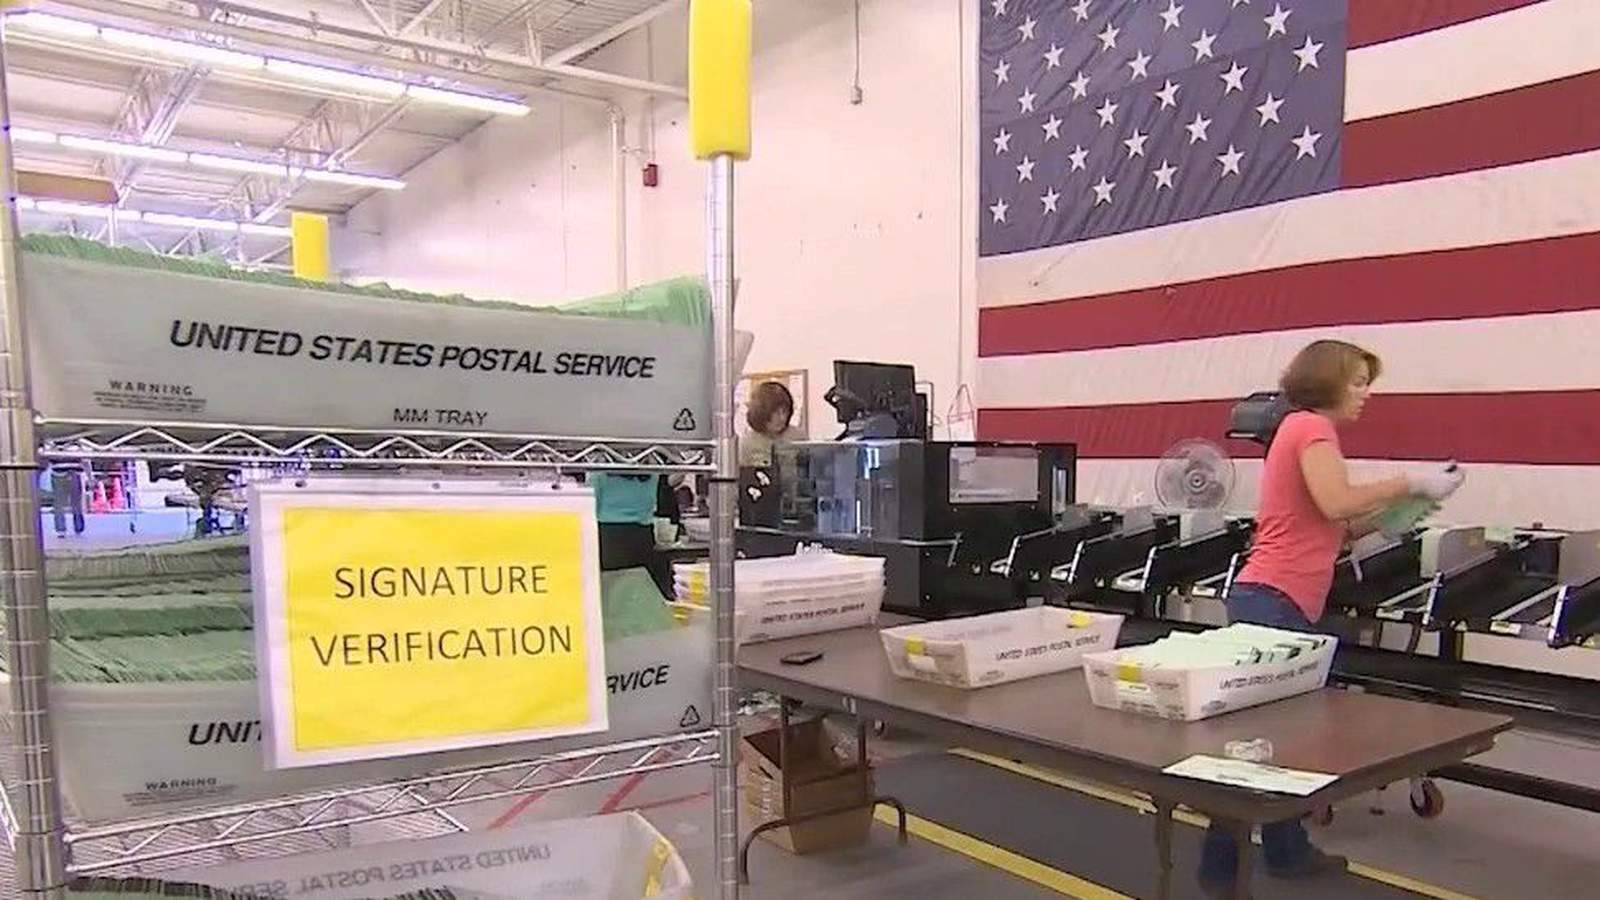 Bexar County voters can track status of mail ballot, vote-by-mail application